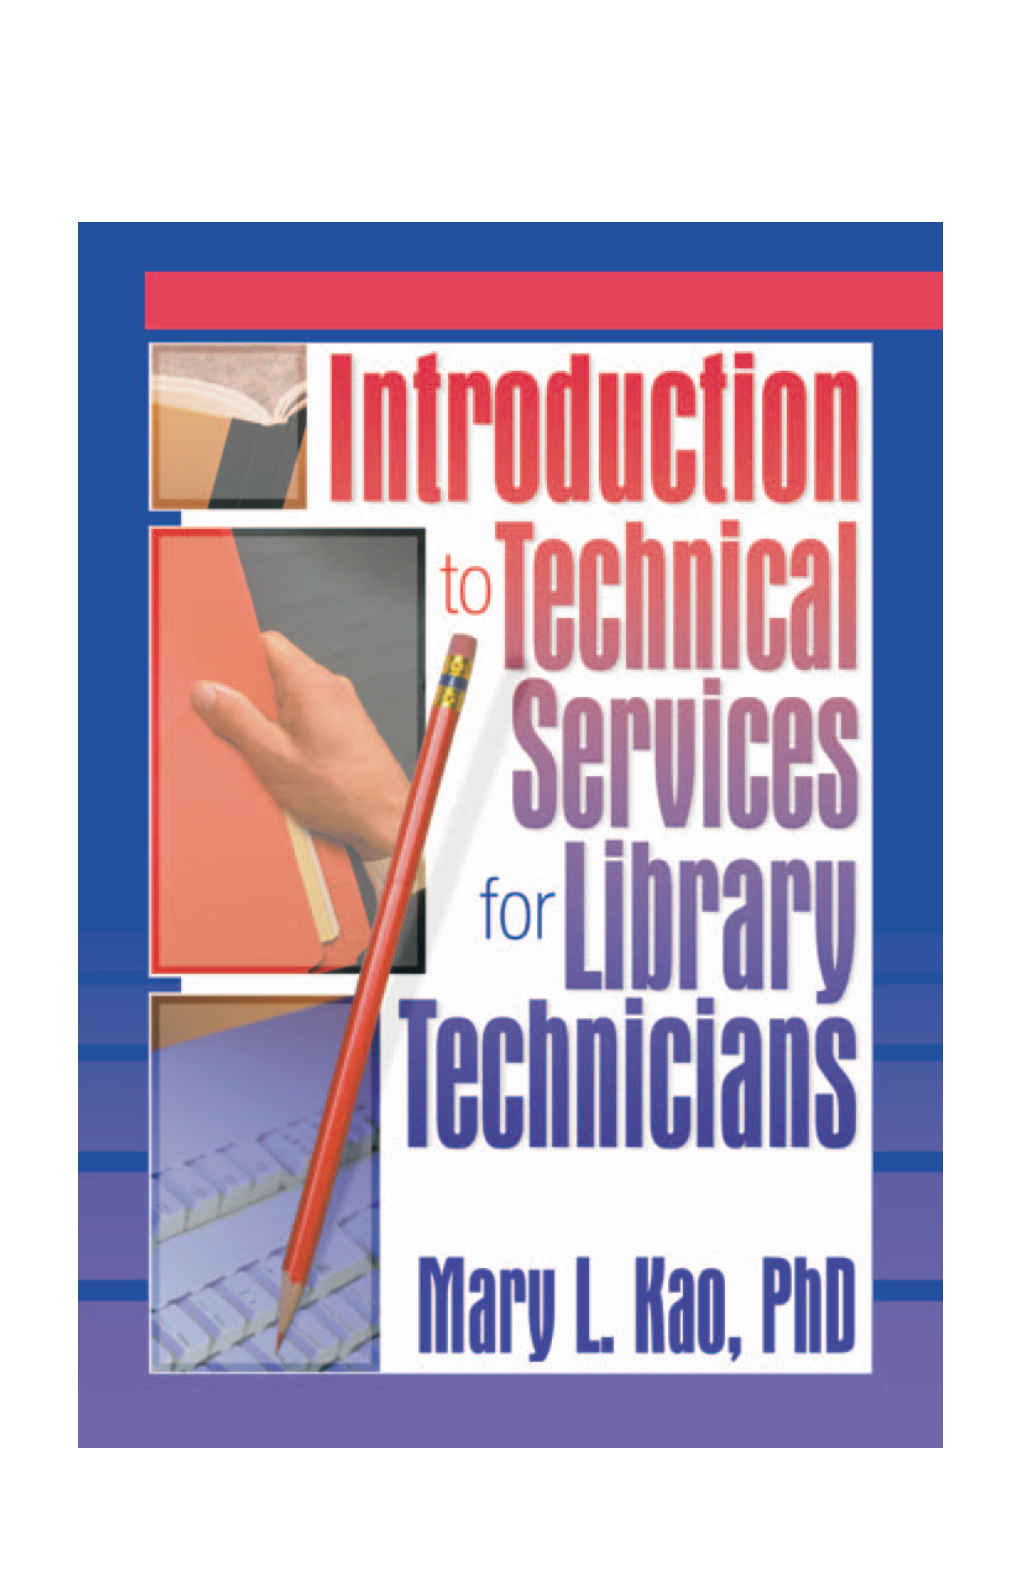 LIBRARIES Introduction to Technical Services for Library Technicians.Pdf